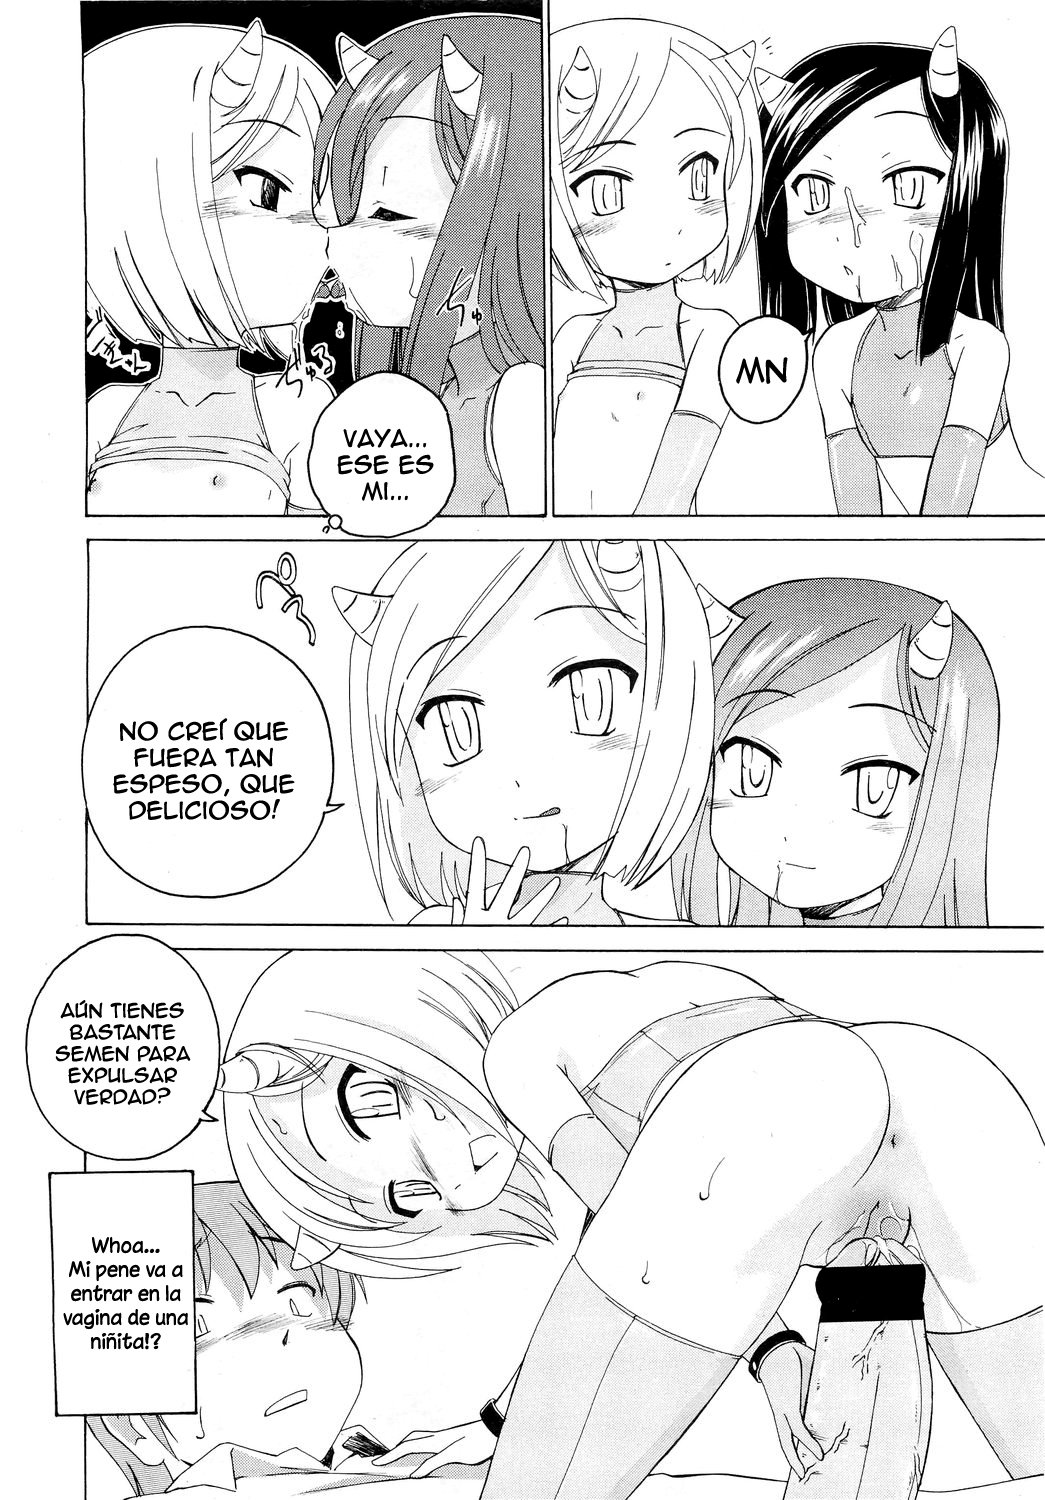 Infierno Lolicon - 7